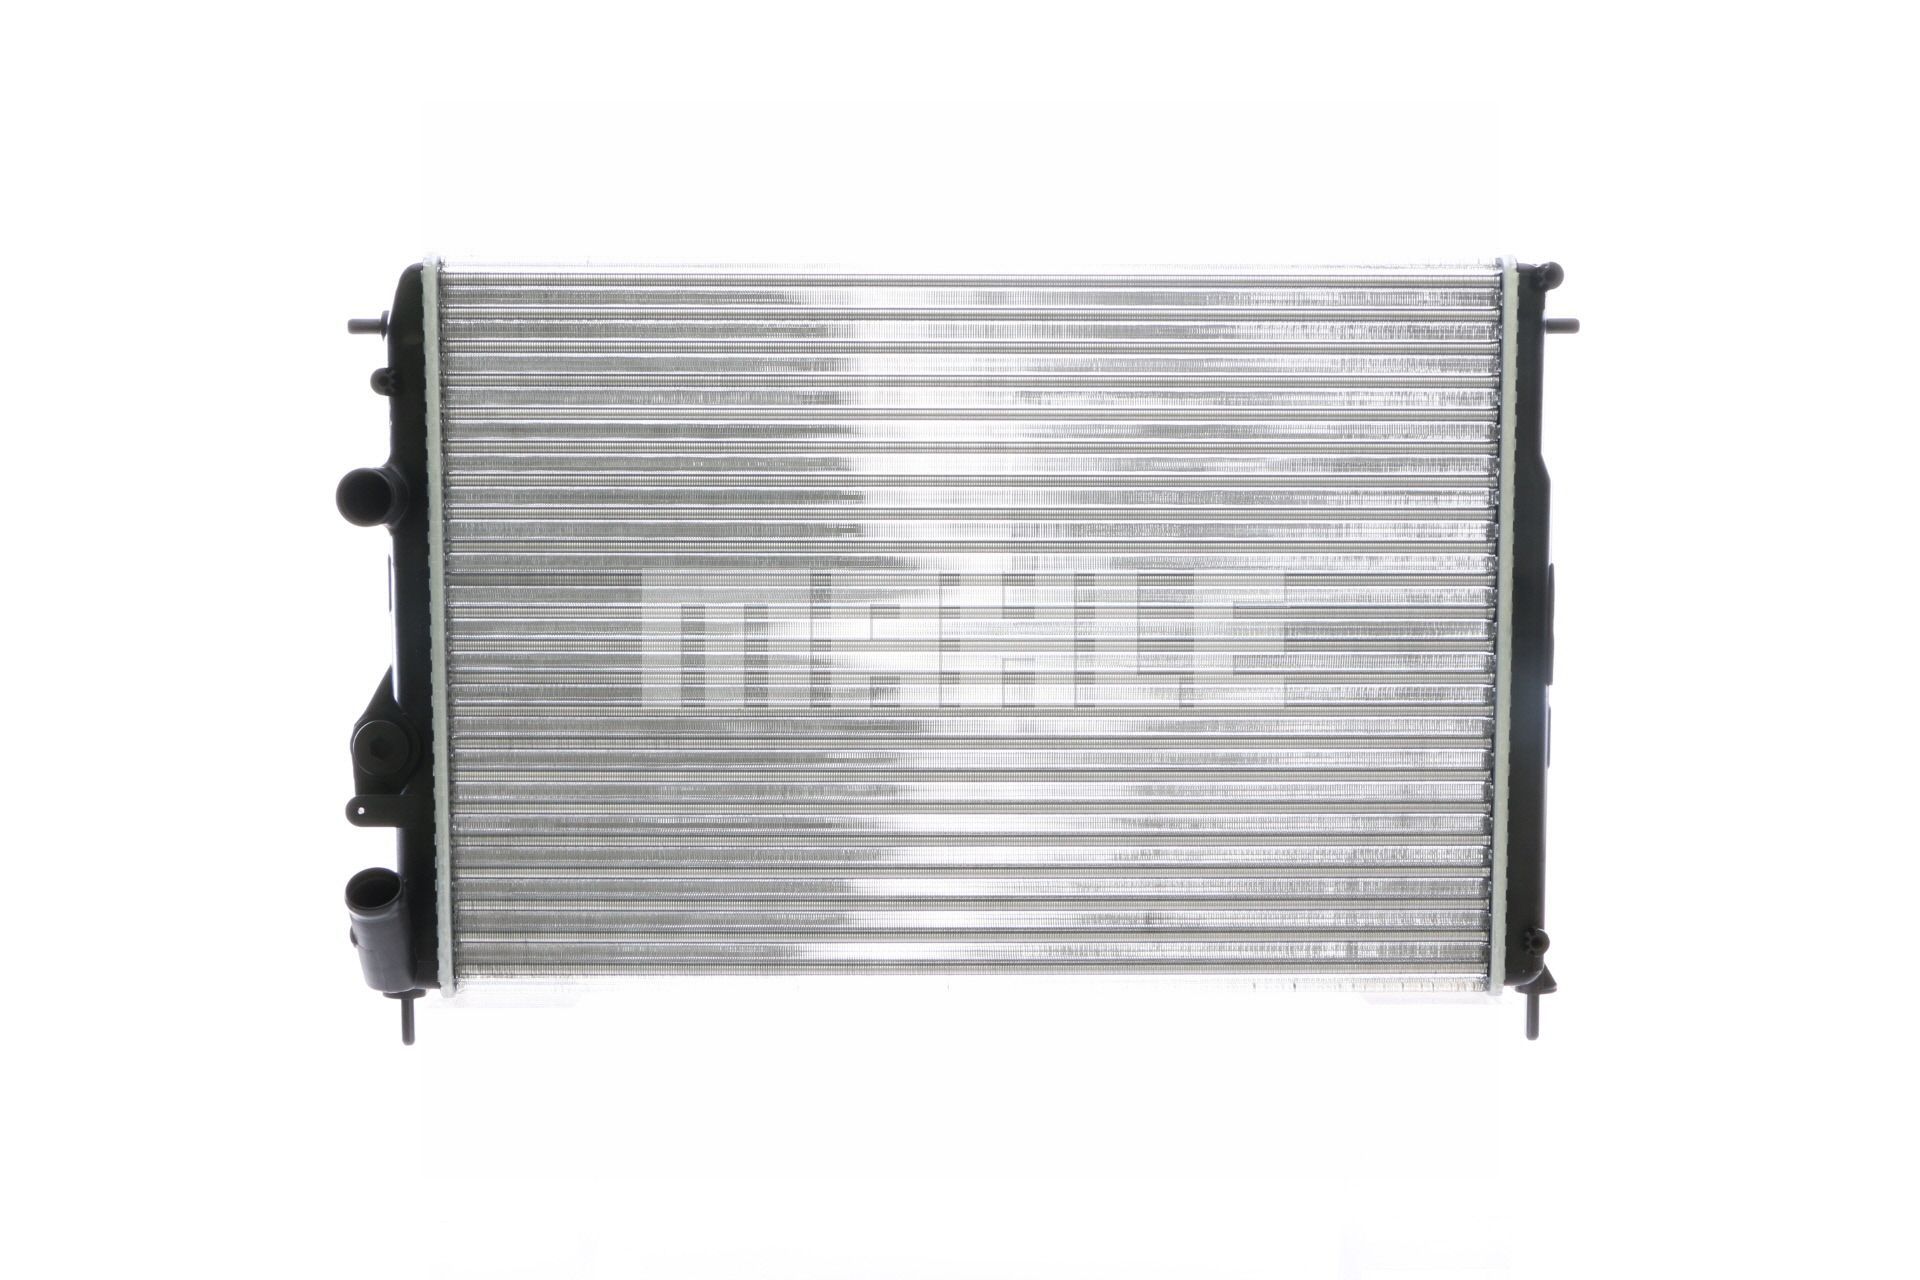 CR 602 000S MAHLE ORIGINAL Radiators DACIA for vehicles with air conditioning, 588 x 415 x 28 mm, Automatic Transmission, Manual Transmission, Mechanically jointed cooling fins